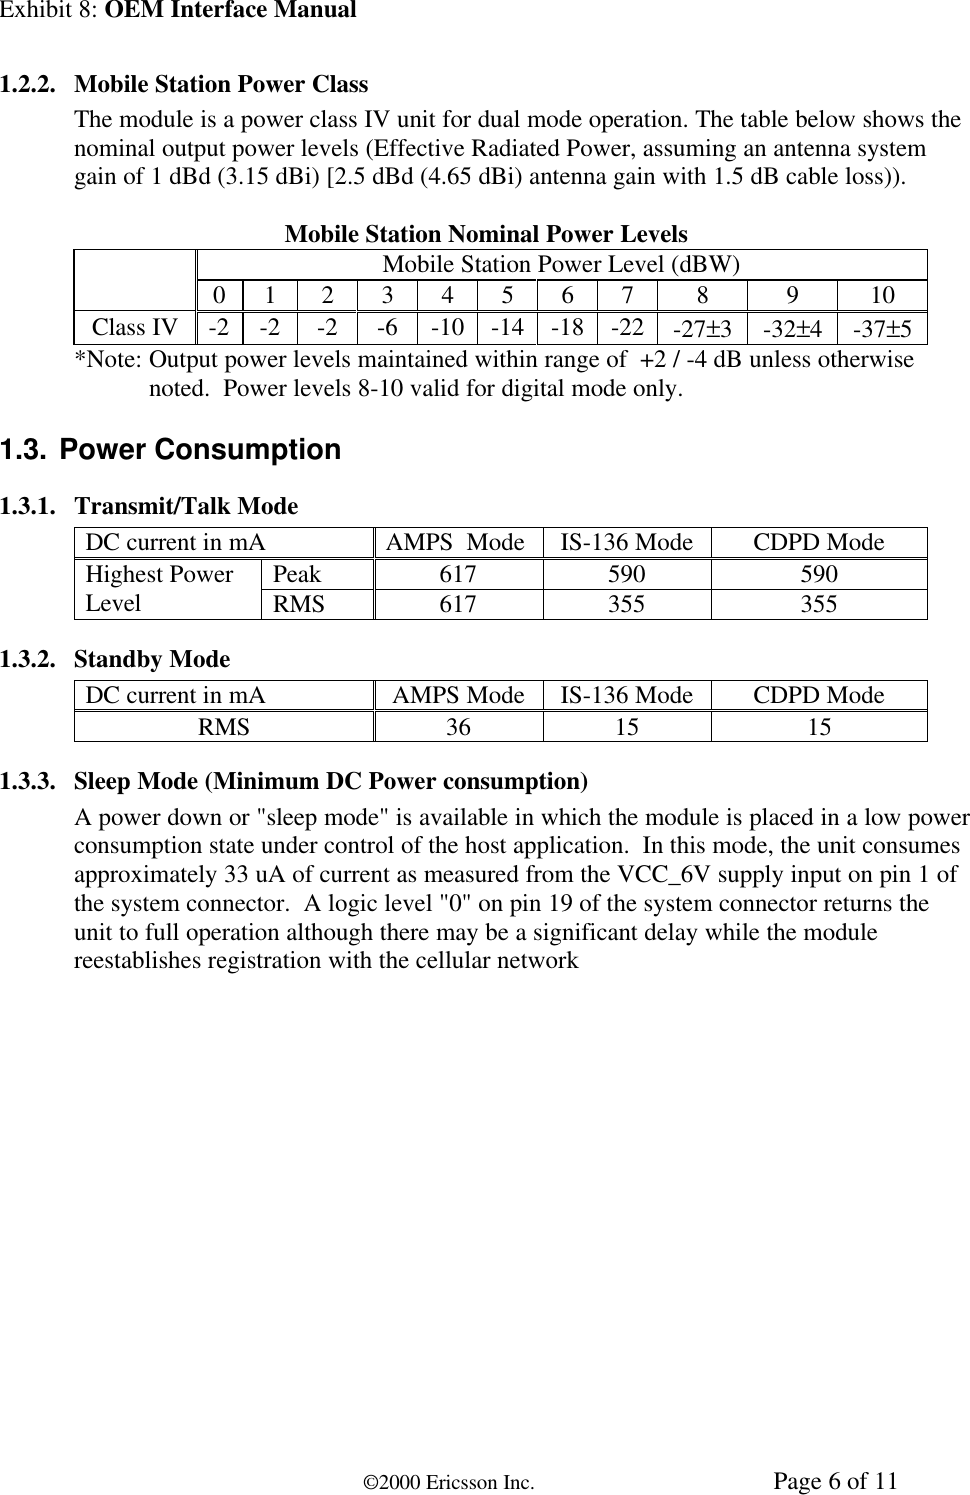 Exhibit 8: OEM Interface Manual©2000 Ericsson Inc. Page 6 of 111.2.2. Mobile Station Power ClassThe module is a power class IV unit for dual mode operation. The table below shows thenominal output power levels (Effective Radiated Power, assuming an antenna systemgain of 1 dBd (3.15 dBi) [2.5 dBd (4.65 dBi) antenna gain with 1.5 dB cable loss)).Mobile Station Nominal Power LevelsMobile Station Power Level (dBW)0 1 2 3 4 5 6 7 8 9 10Class IV -2 -2 -2 -6 -10 -14 -18 -22 -27±3-32±4-37±5*Note: Output power levels maintained within range of  +2 / -4 dB unless otherwisenoted.  Power levels 8-10 valid for digital mode only.1.3. Power Consumption1.3.1. Transmit/Talk ModeDC current in mA AMPS  Mode IS-136 Mode CDPD ModePeak 617 590 590Highest PowerLevel RMS 617 355 3551.3.2. Standby ModeDC current in mA AMPS Mode IS-136 Mode CDPD ModeRMS 36 15 151.3.3. Sleep Mode (Minimum DC Power consumption)A power down or &quot;sleep mode&quot; is available in which the module is placed in a low powerconsumption state under control of the host application.  In this mode, the unit consumesapproximately 33 uA of current as measured from the VCC_6V supply input on pin 1 ofthe system connector.  A logic level &quot;0&quot; on pin 19 of the system connector returns theunit to full operation although there may be a significant delay while the modulereestablishes registration with the cellular network